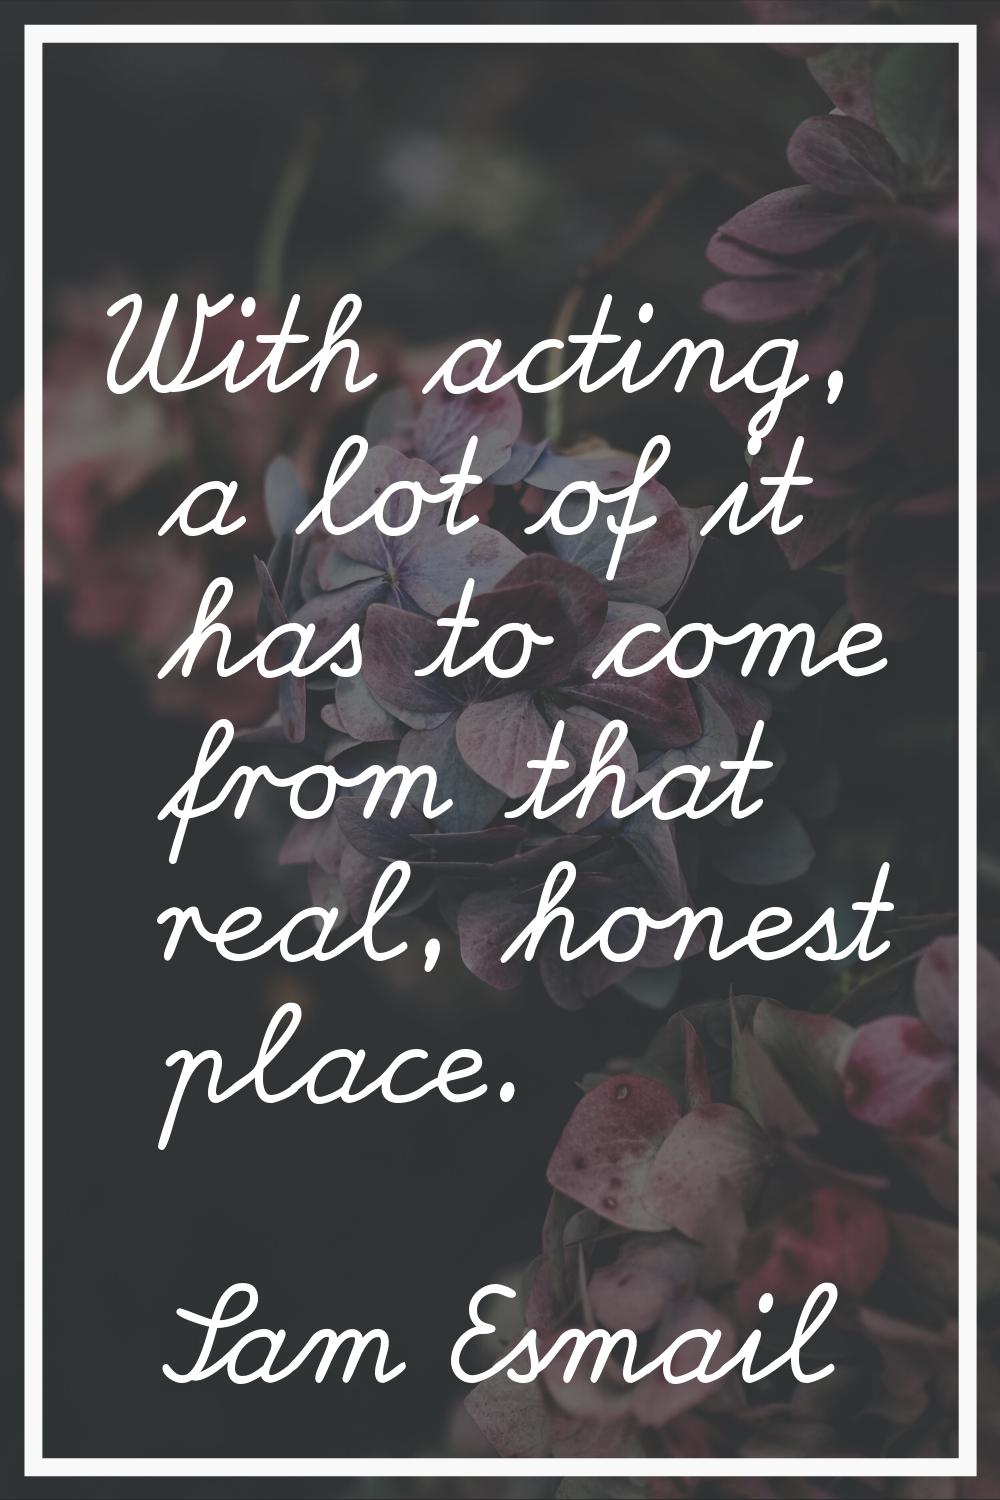 With acting, a lot of it has to come from that real, honest place.